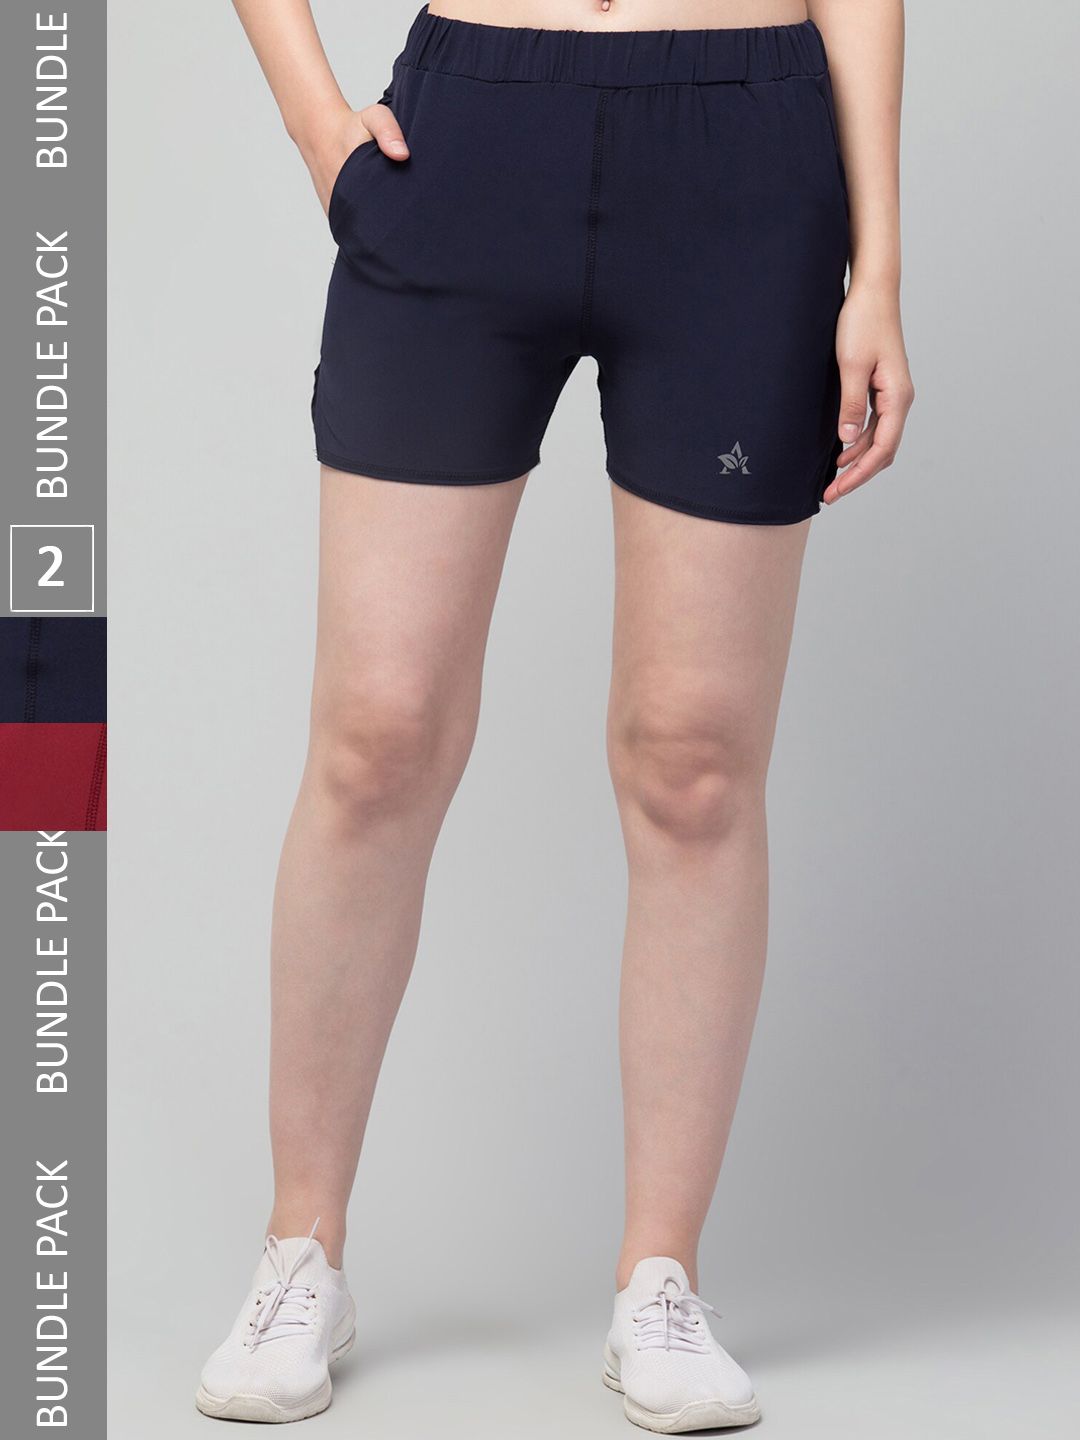 Apraa & Parma Women Pack Of 2 E-Dry Sports Shorts Price in India